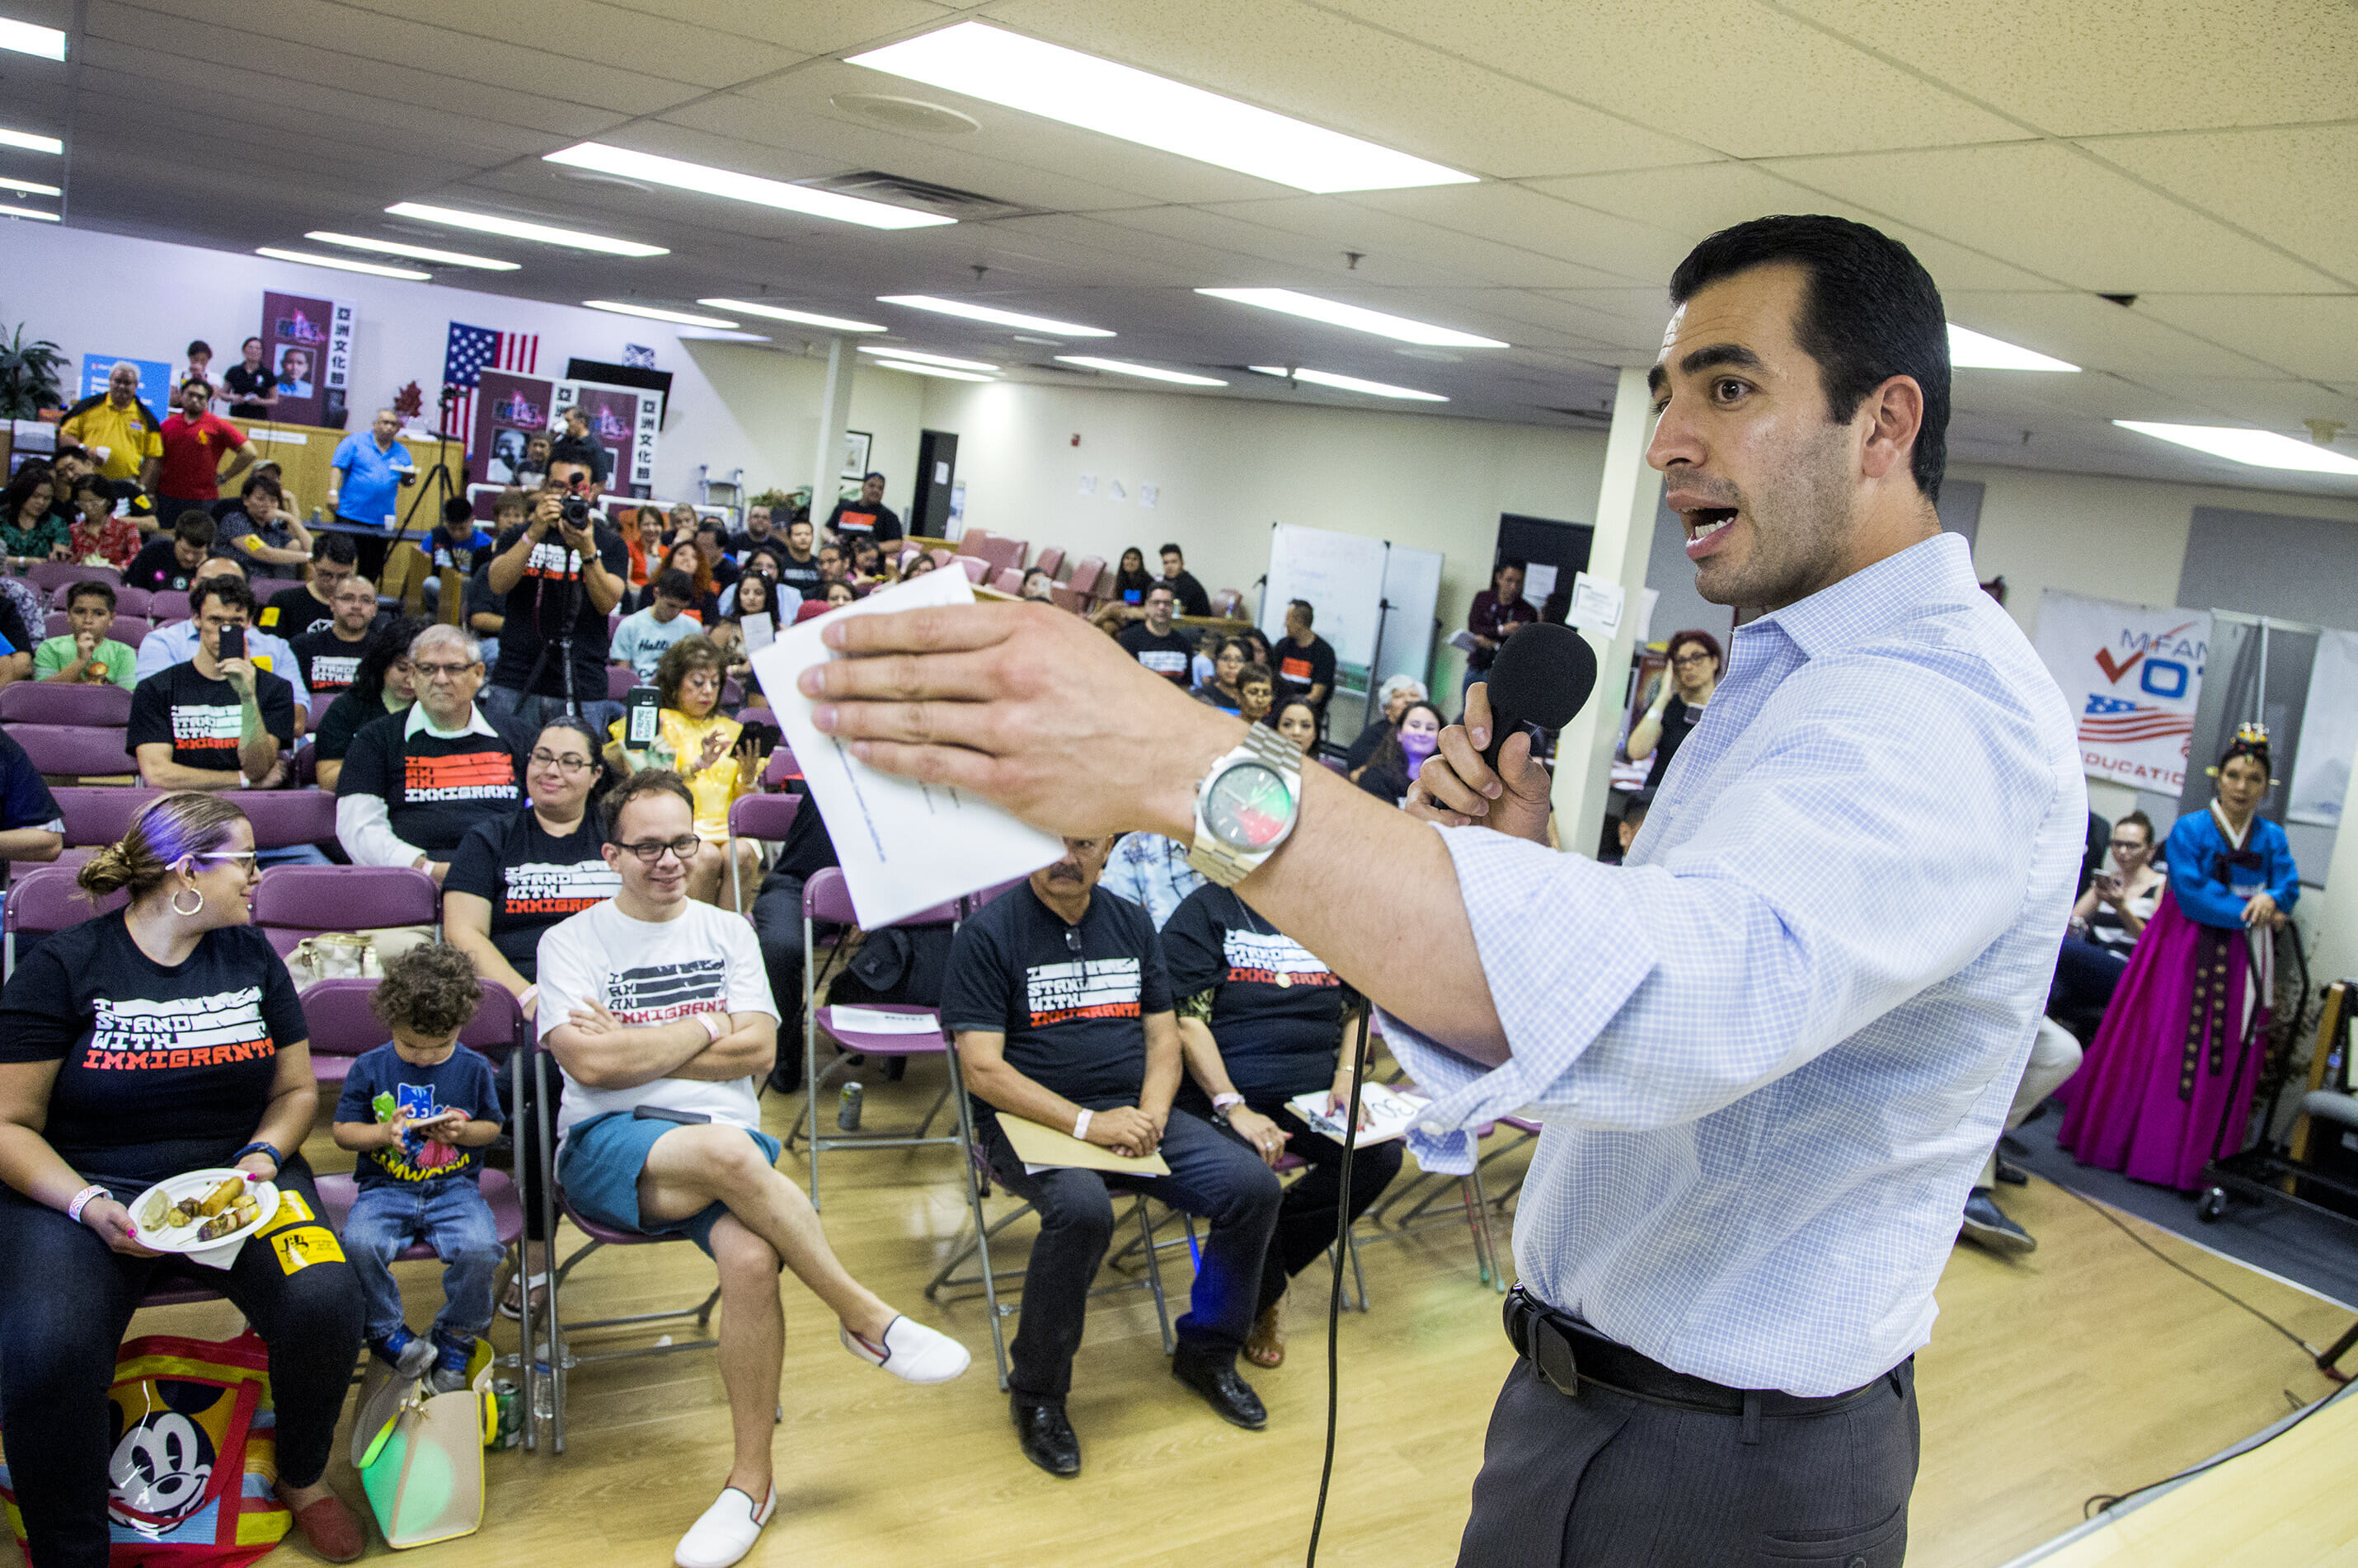 Second woman accuses Kihuen of persistent, unwanted sexual advances pic